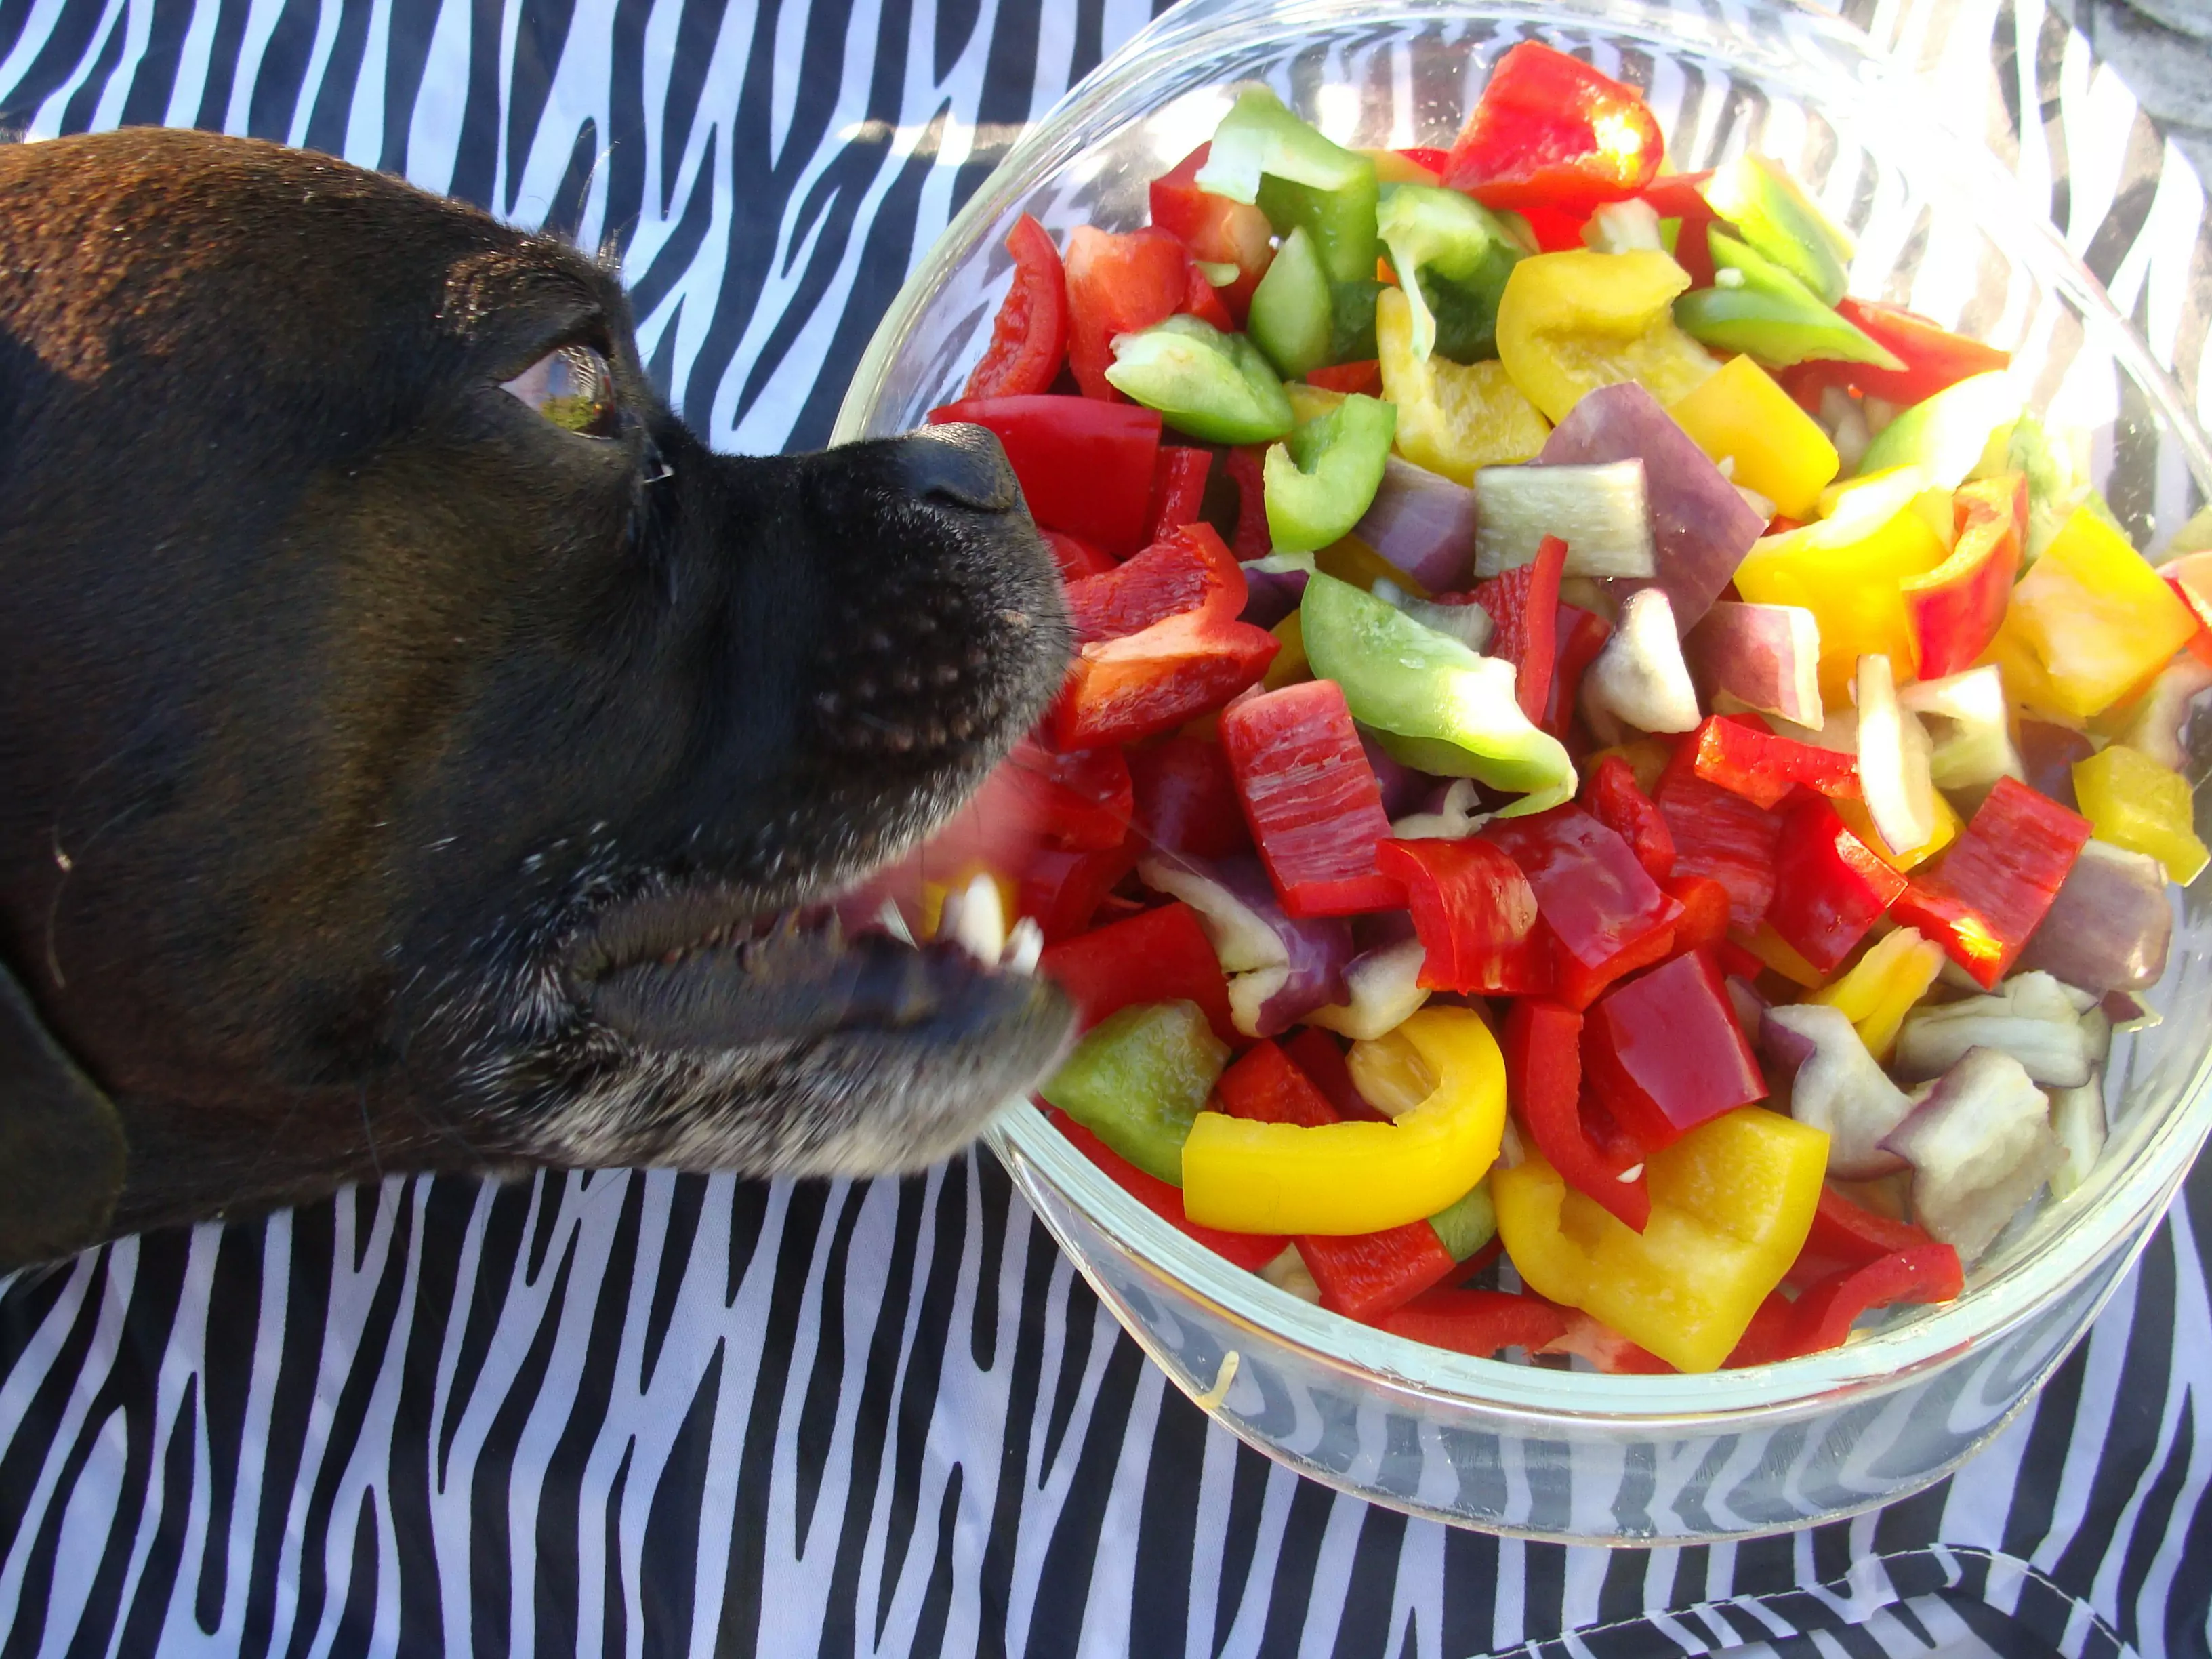 Can dogs eat chili peppers?